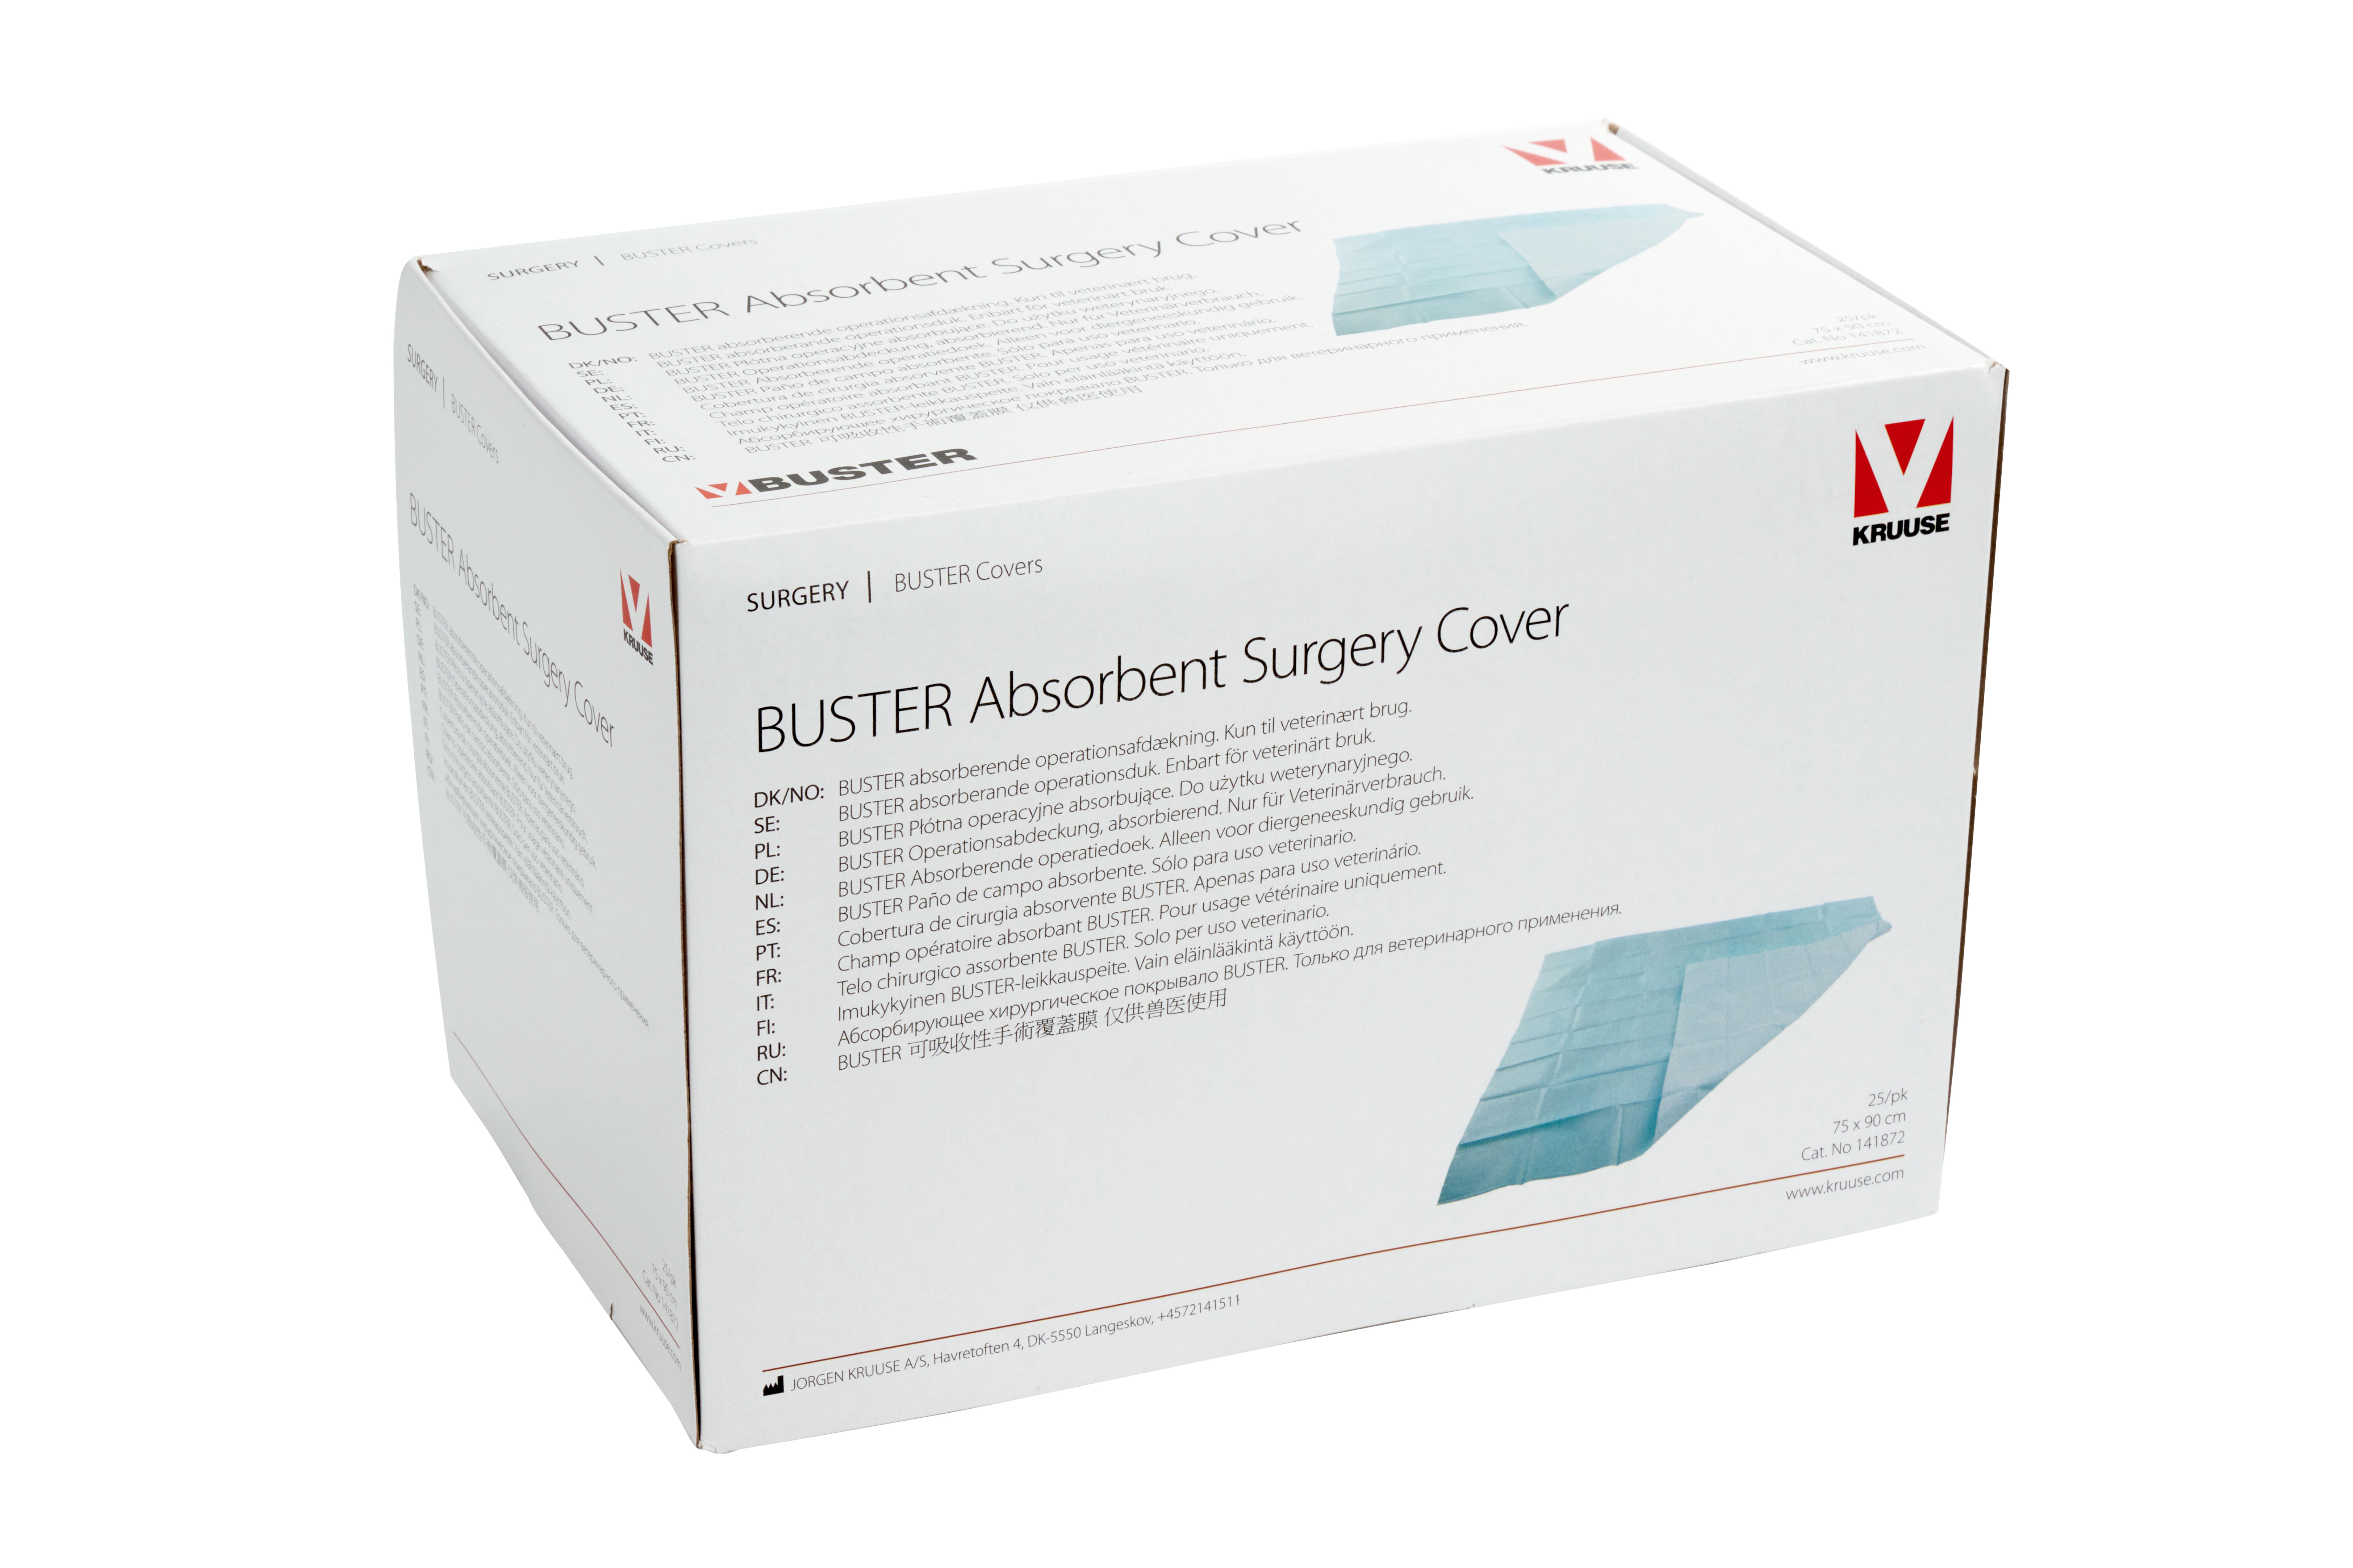 BUSTER Absorbent Surgery Cover 75x90 cm, 25/pk